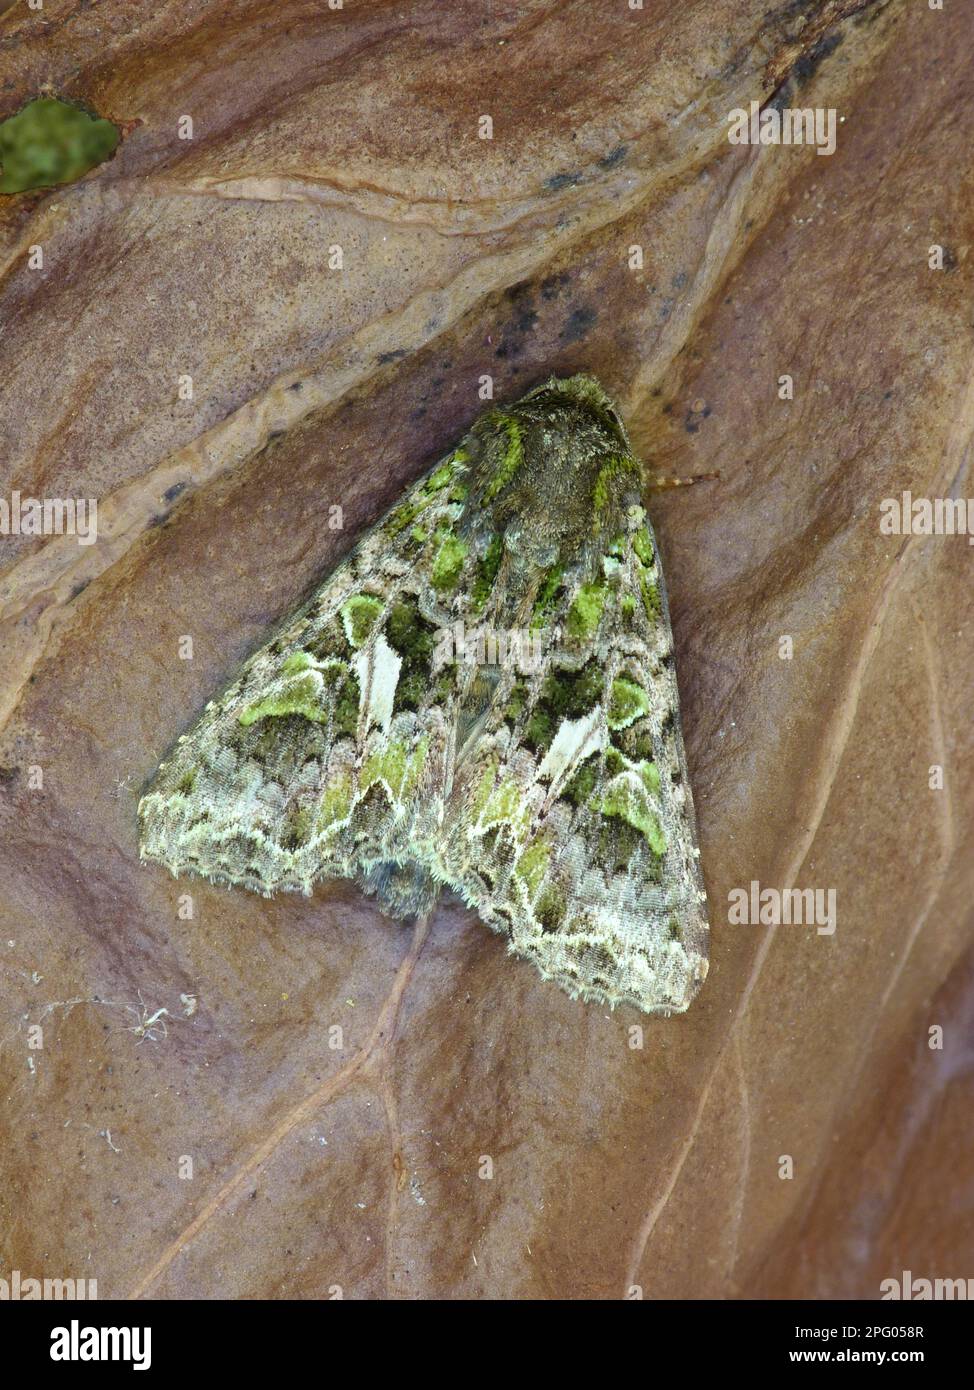 Green reporting owl, Green reporting owls, Insects, Moths, Butterflies, Animals, Other animals, Orache Moth (Trachea atriplicis) adult, resting on Stock Photo